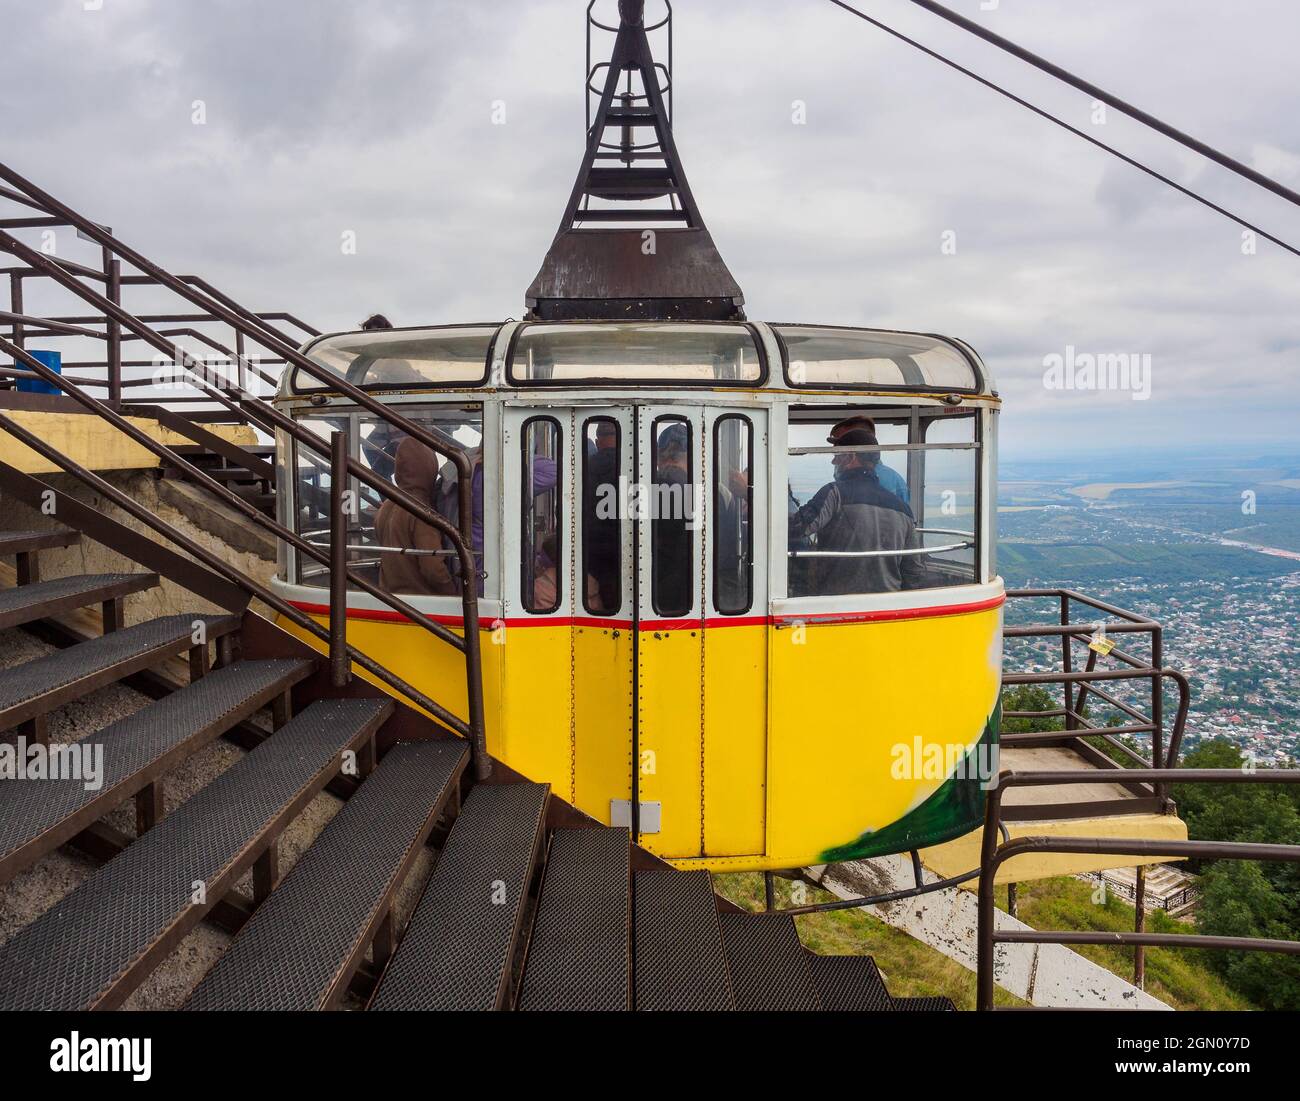 Old yellow cable car on the upper station above the town with people Stock Photo